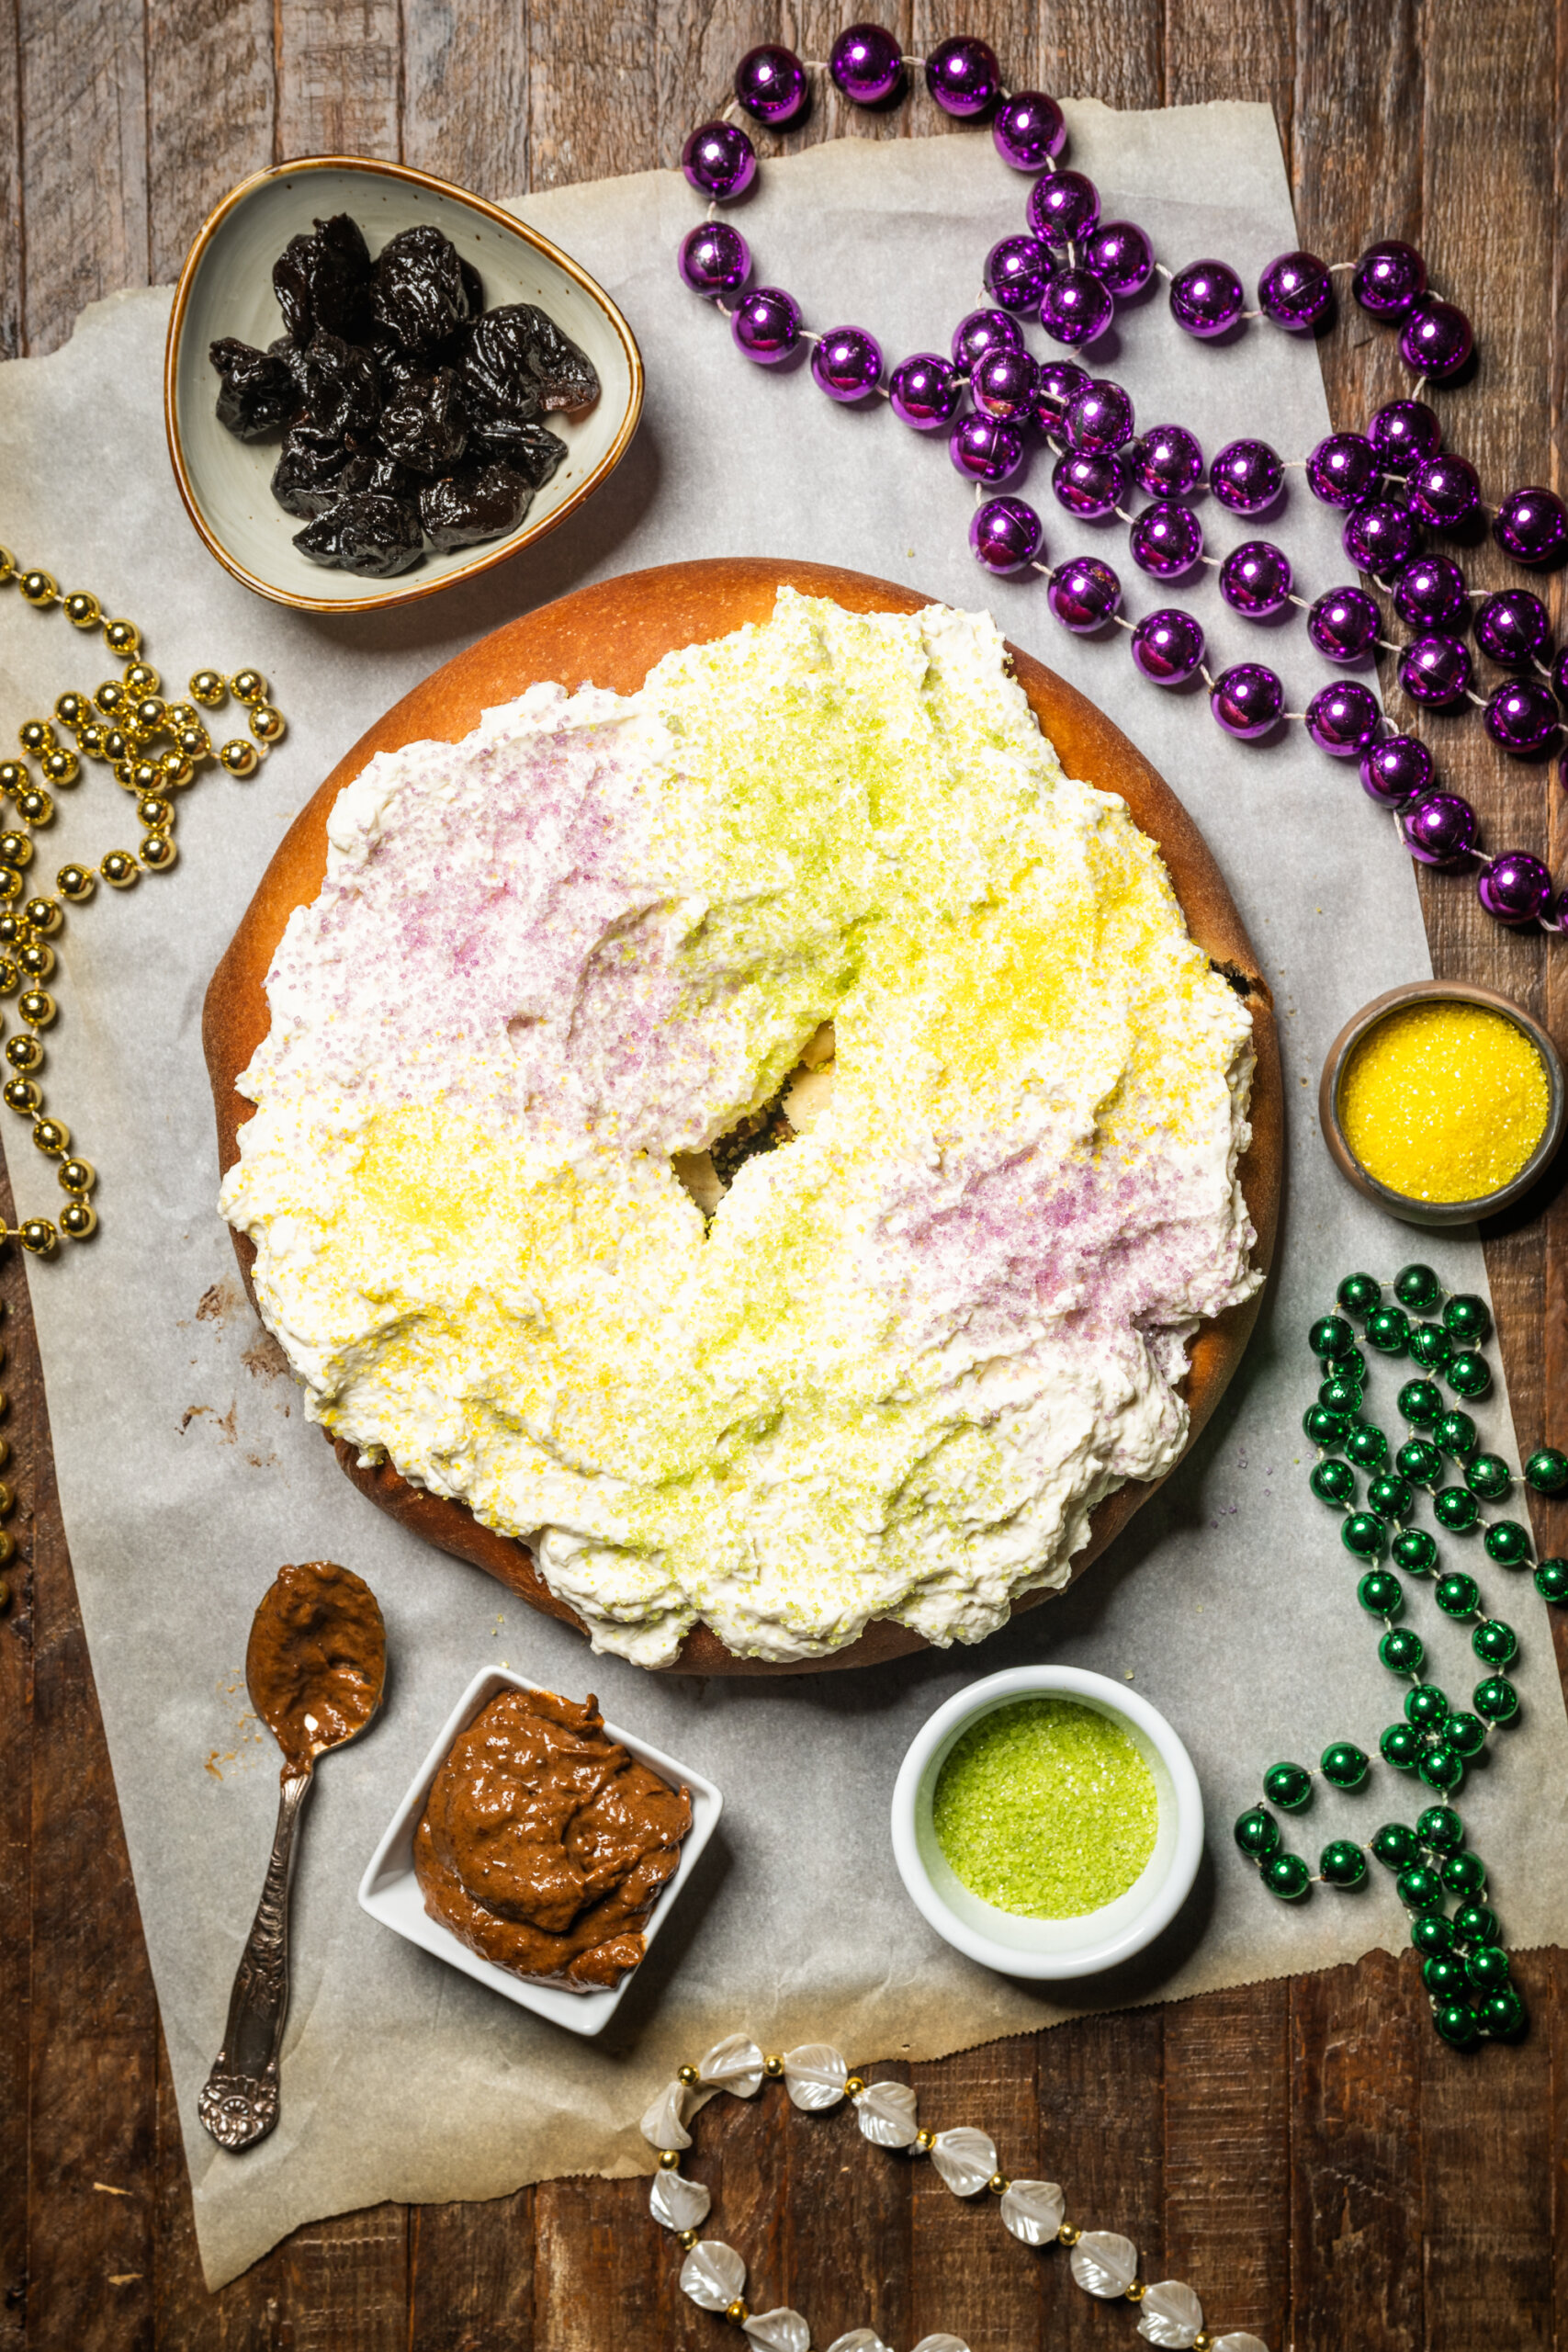 Overhead view of the finished prune-filled king cake